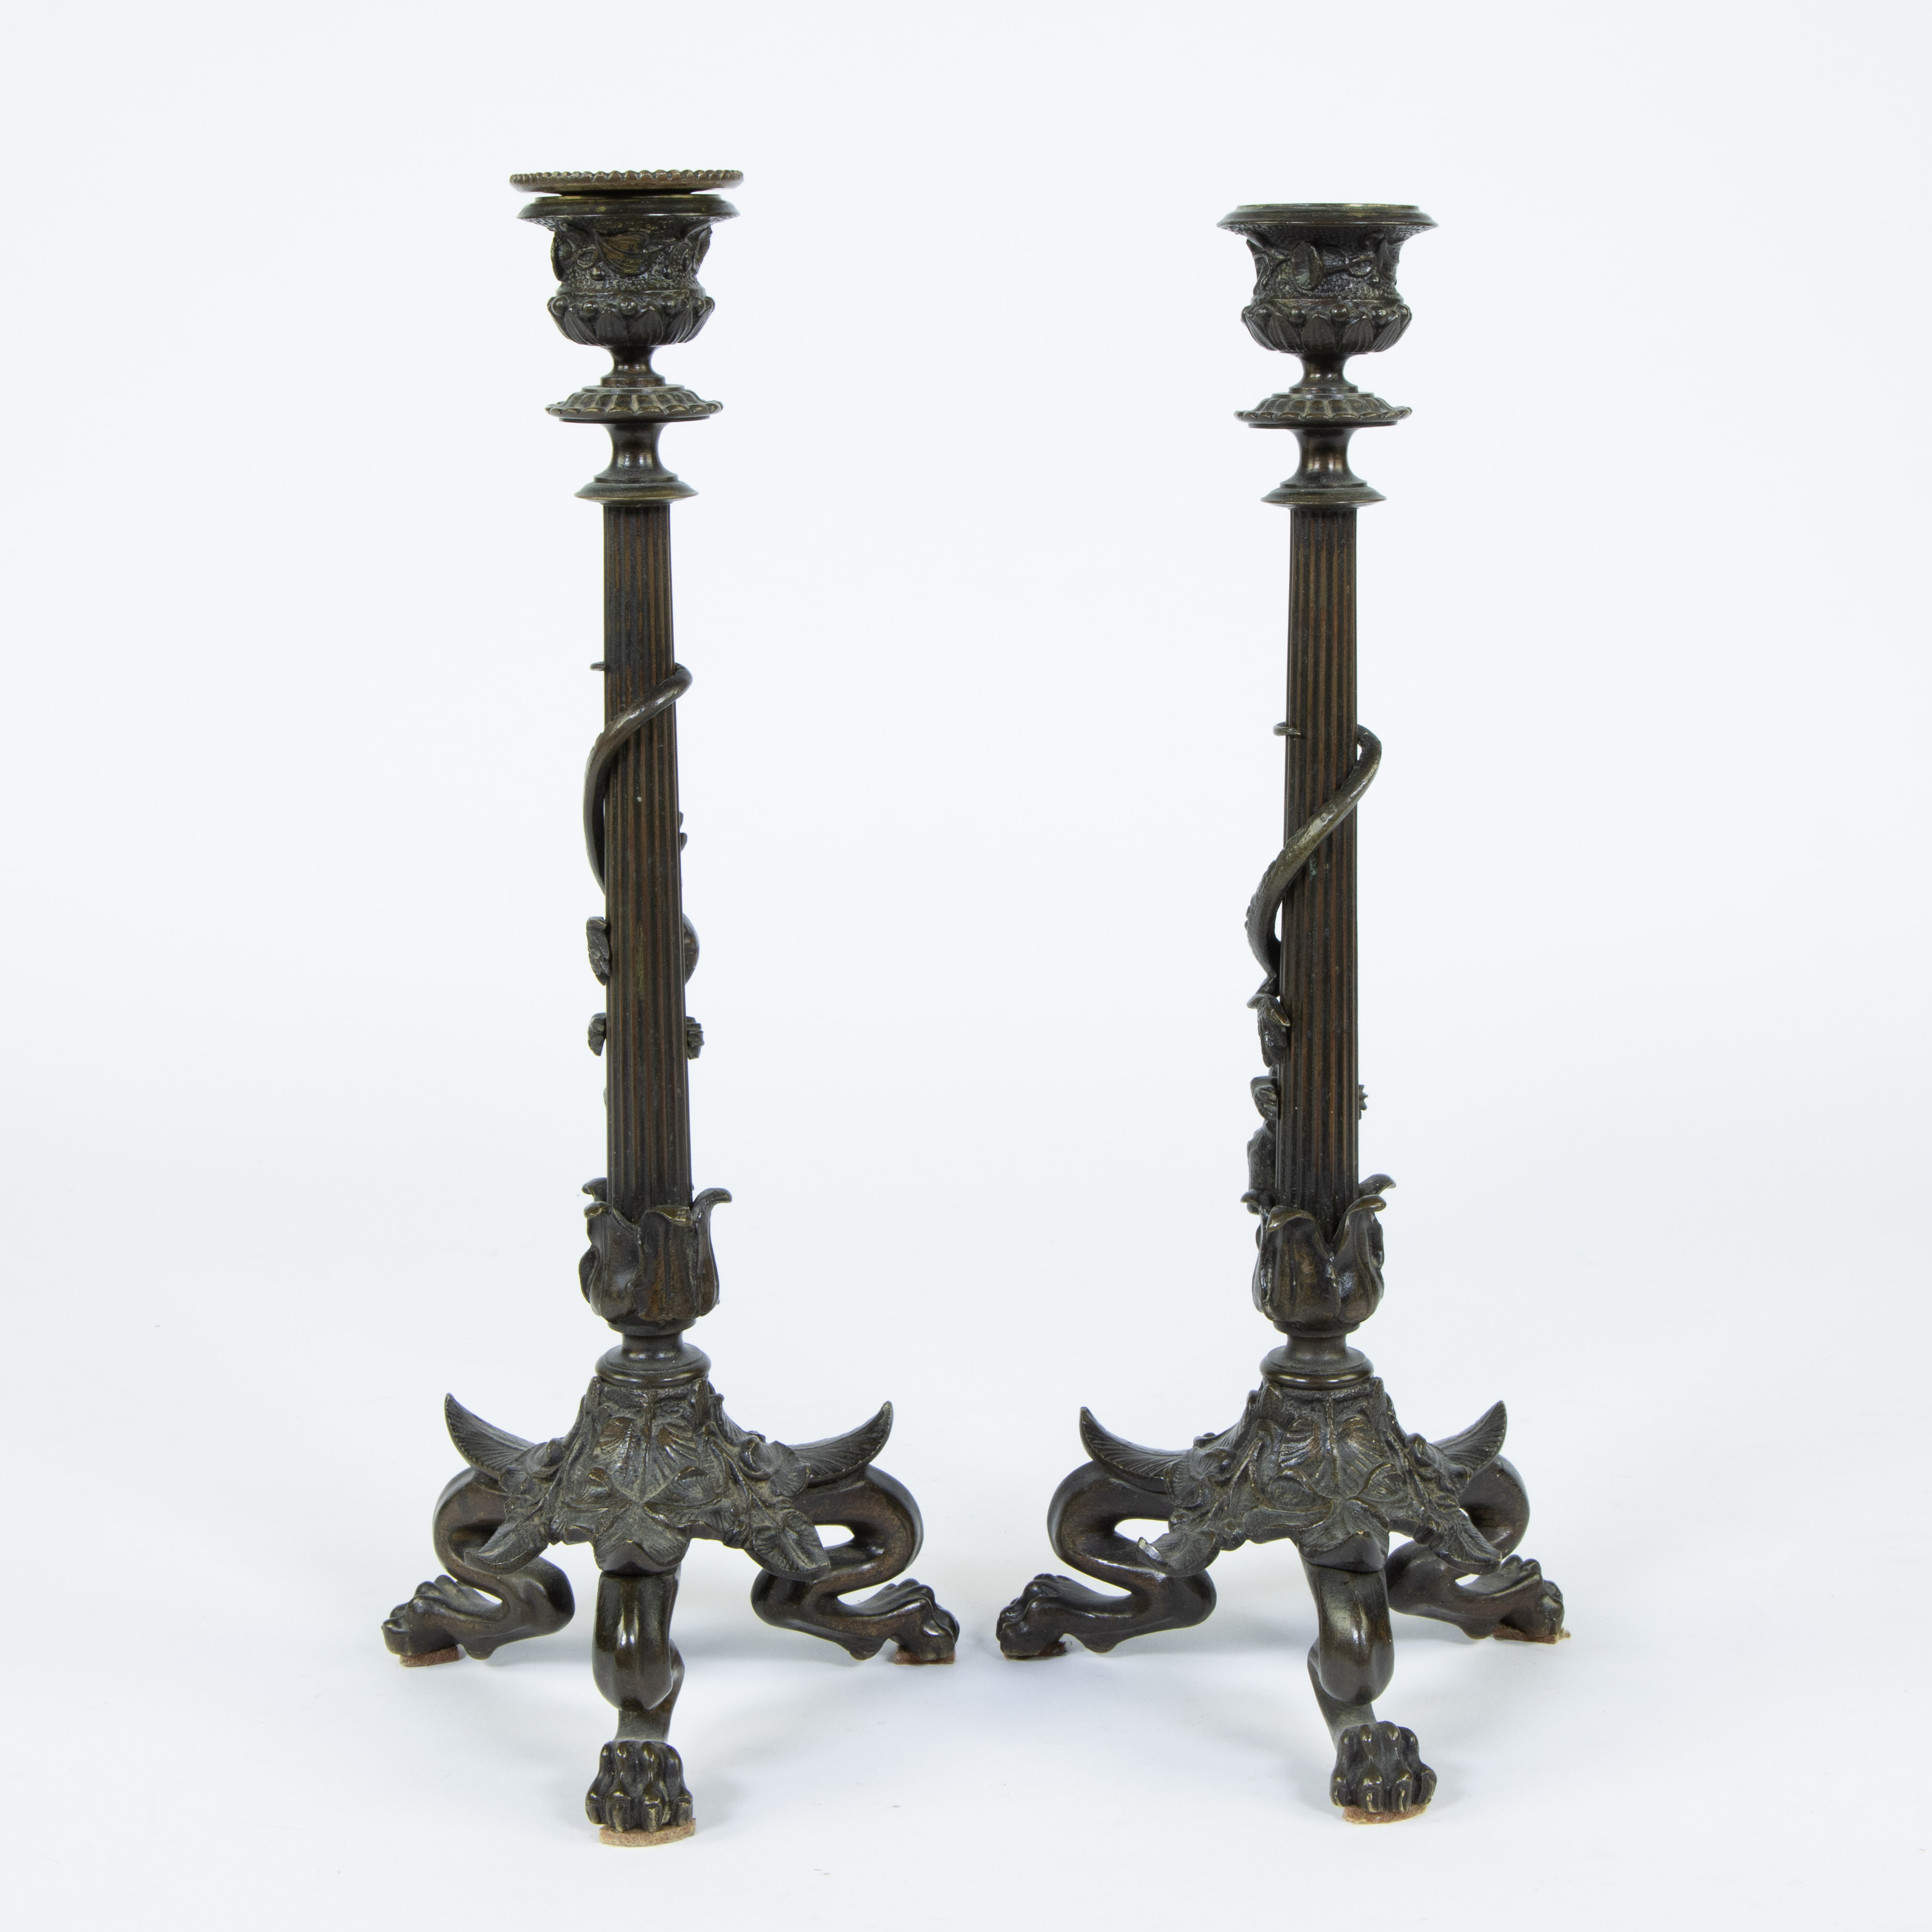 Pair of bronze candlesticks on lion feet decorated with a crocodile, Barbedienne, 19th century - Image 3 of 4